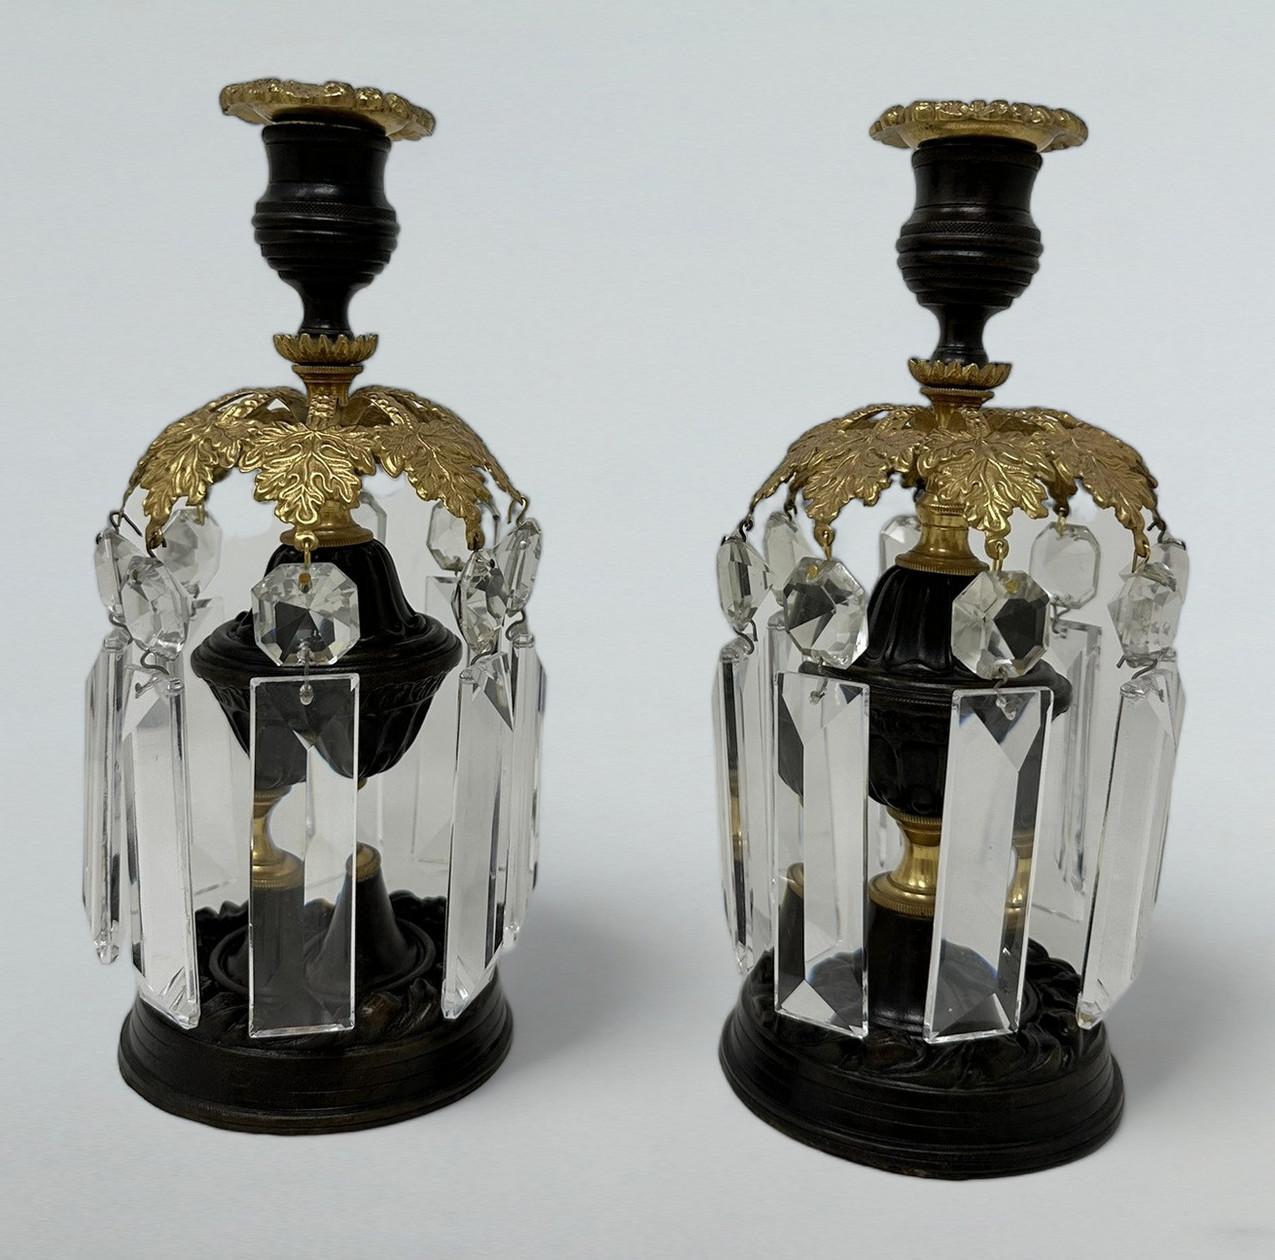 Pair English Regency Ormolu Bronze Crystal Lusters Candlesticks Candelabra 19Ct  In Good Condition For Sale In Dublin, Ireland